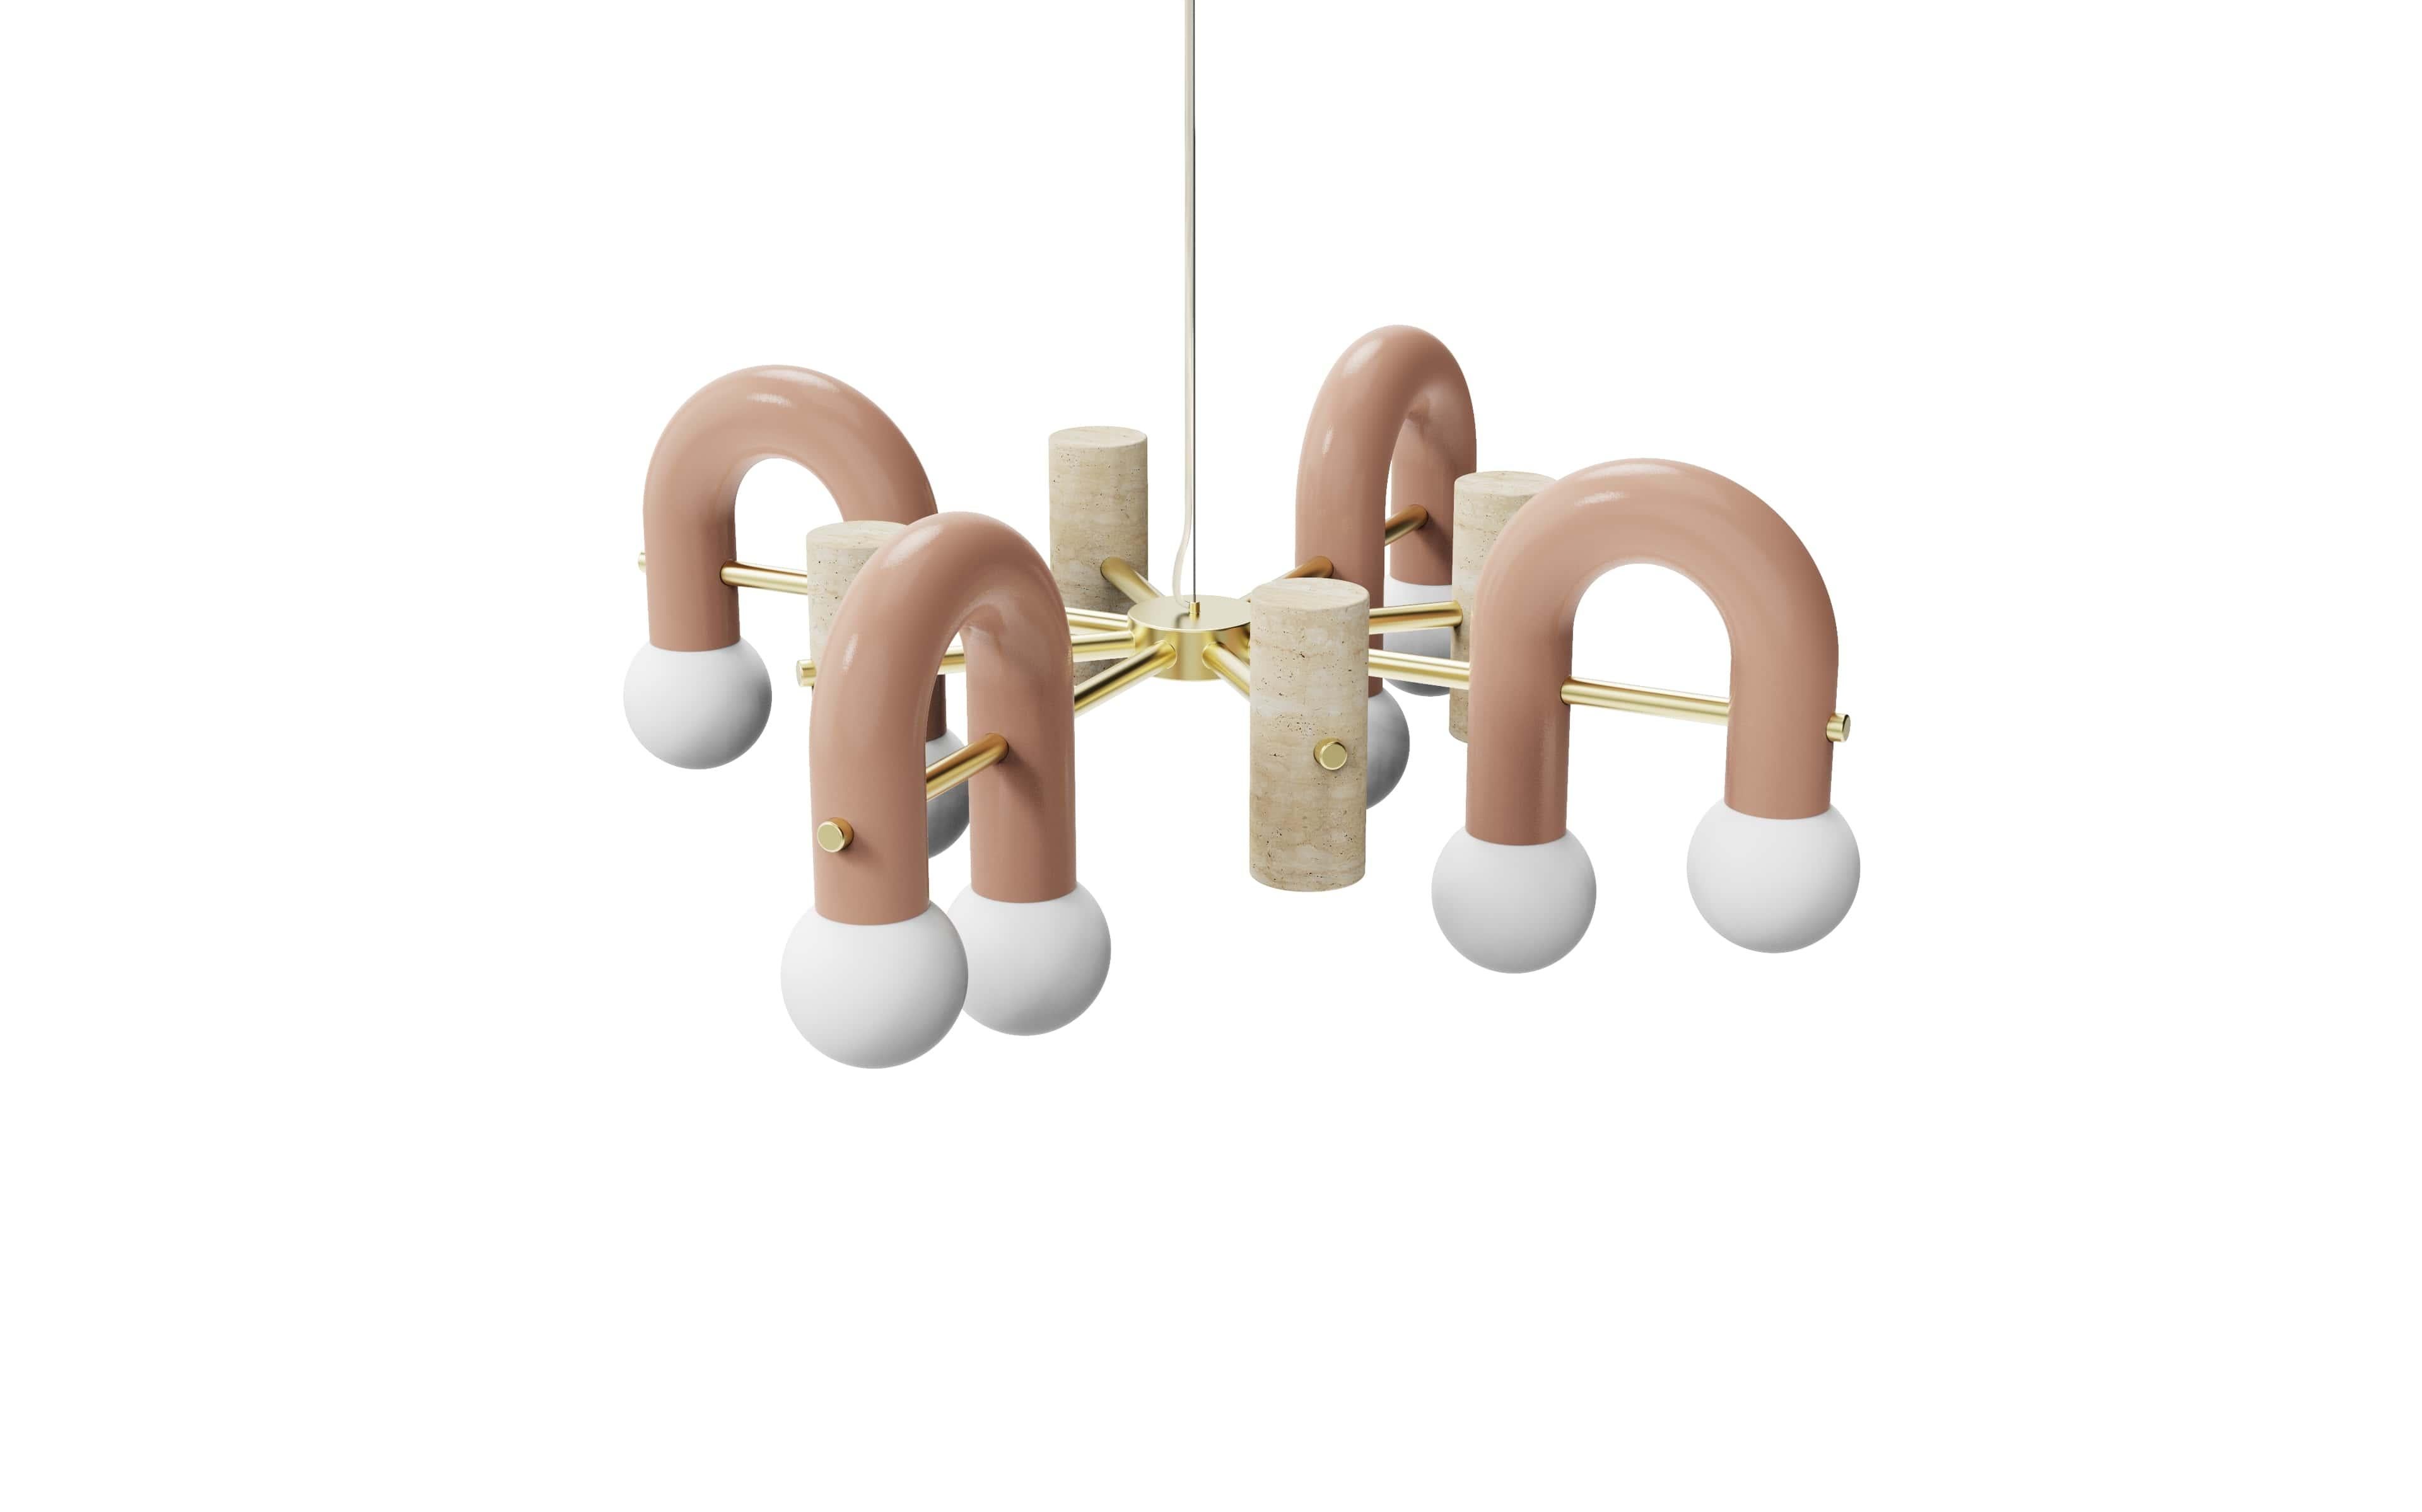 Brass Pyppe suspension lamp 100 by Dooq
Dimensions: 36 x 100 x 100 cm
Materials: Lacquered metal, brass, nickel/copper, travertine

All our lamps can be wired according to each country. If sold to the USA it will be wired for the USA for